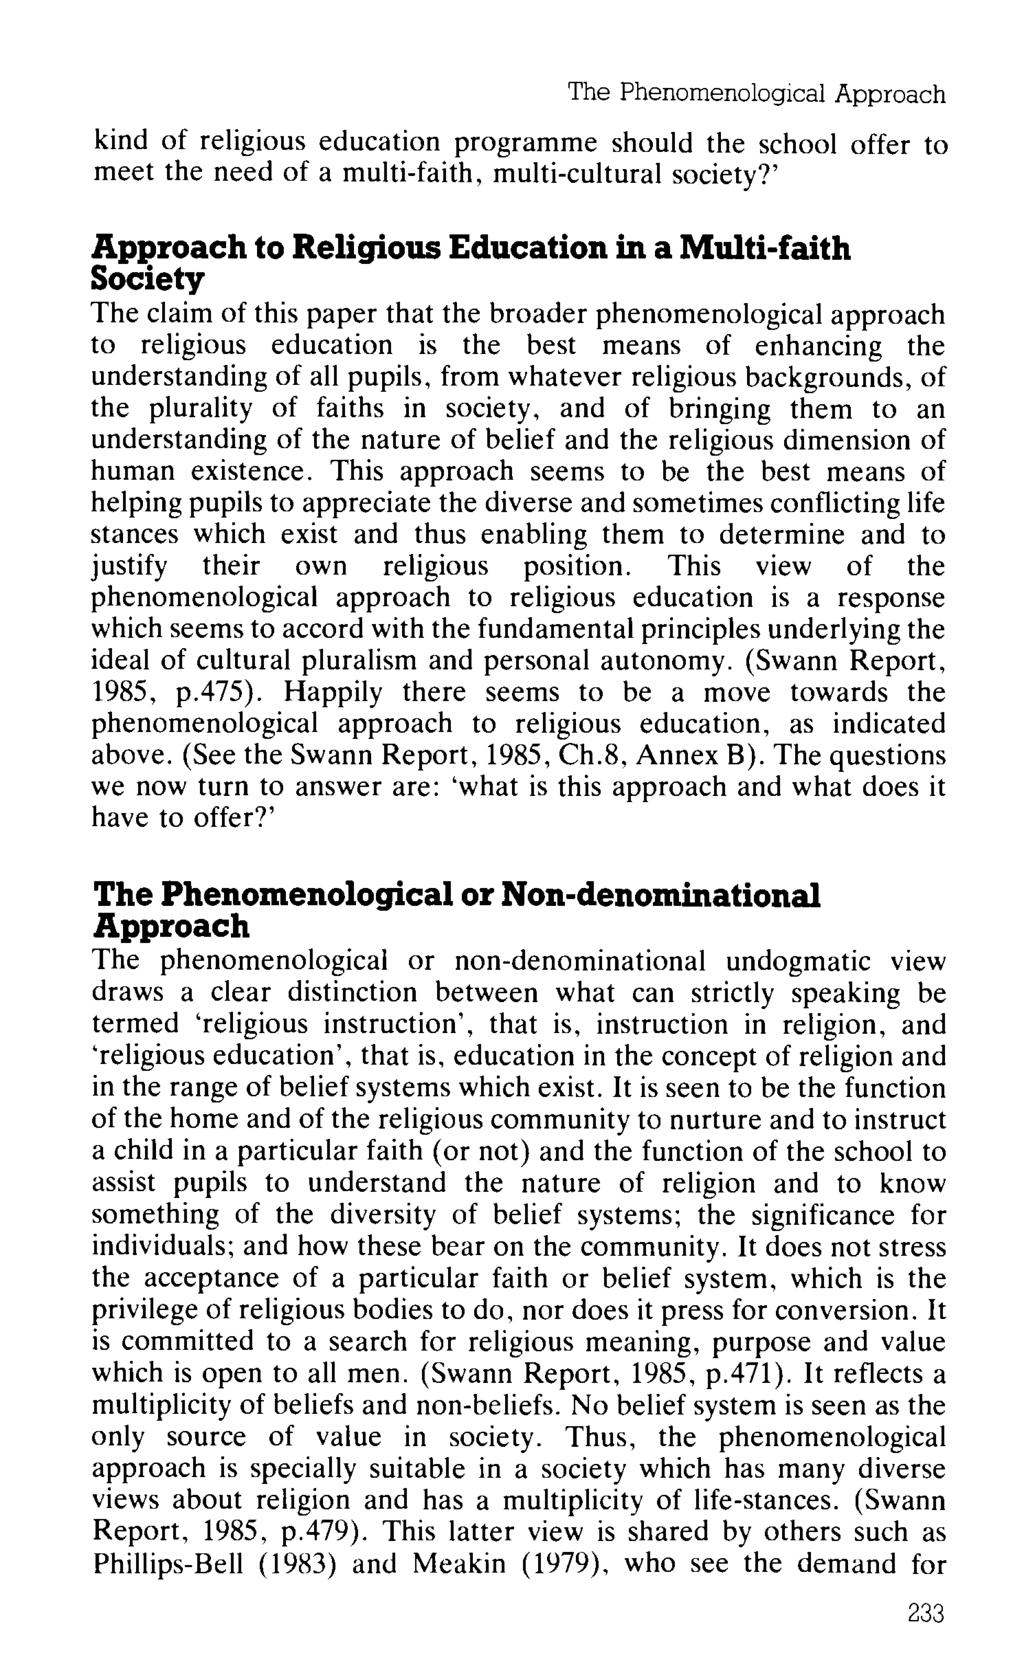 The Phenomenological Approach kind of religious education programme should the school offer to meet the need of a multi-faith, multi-cultural society?